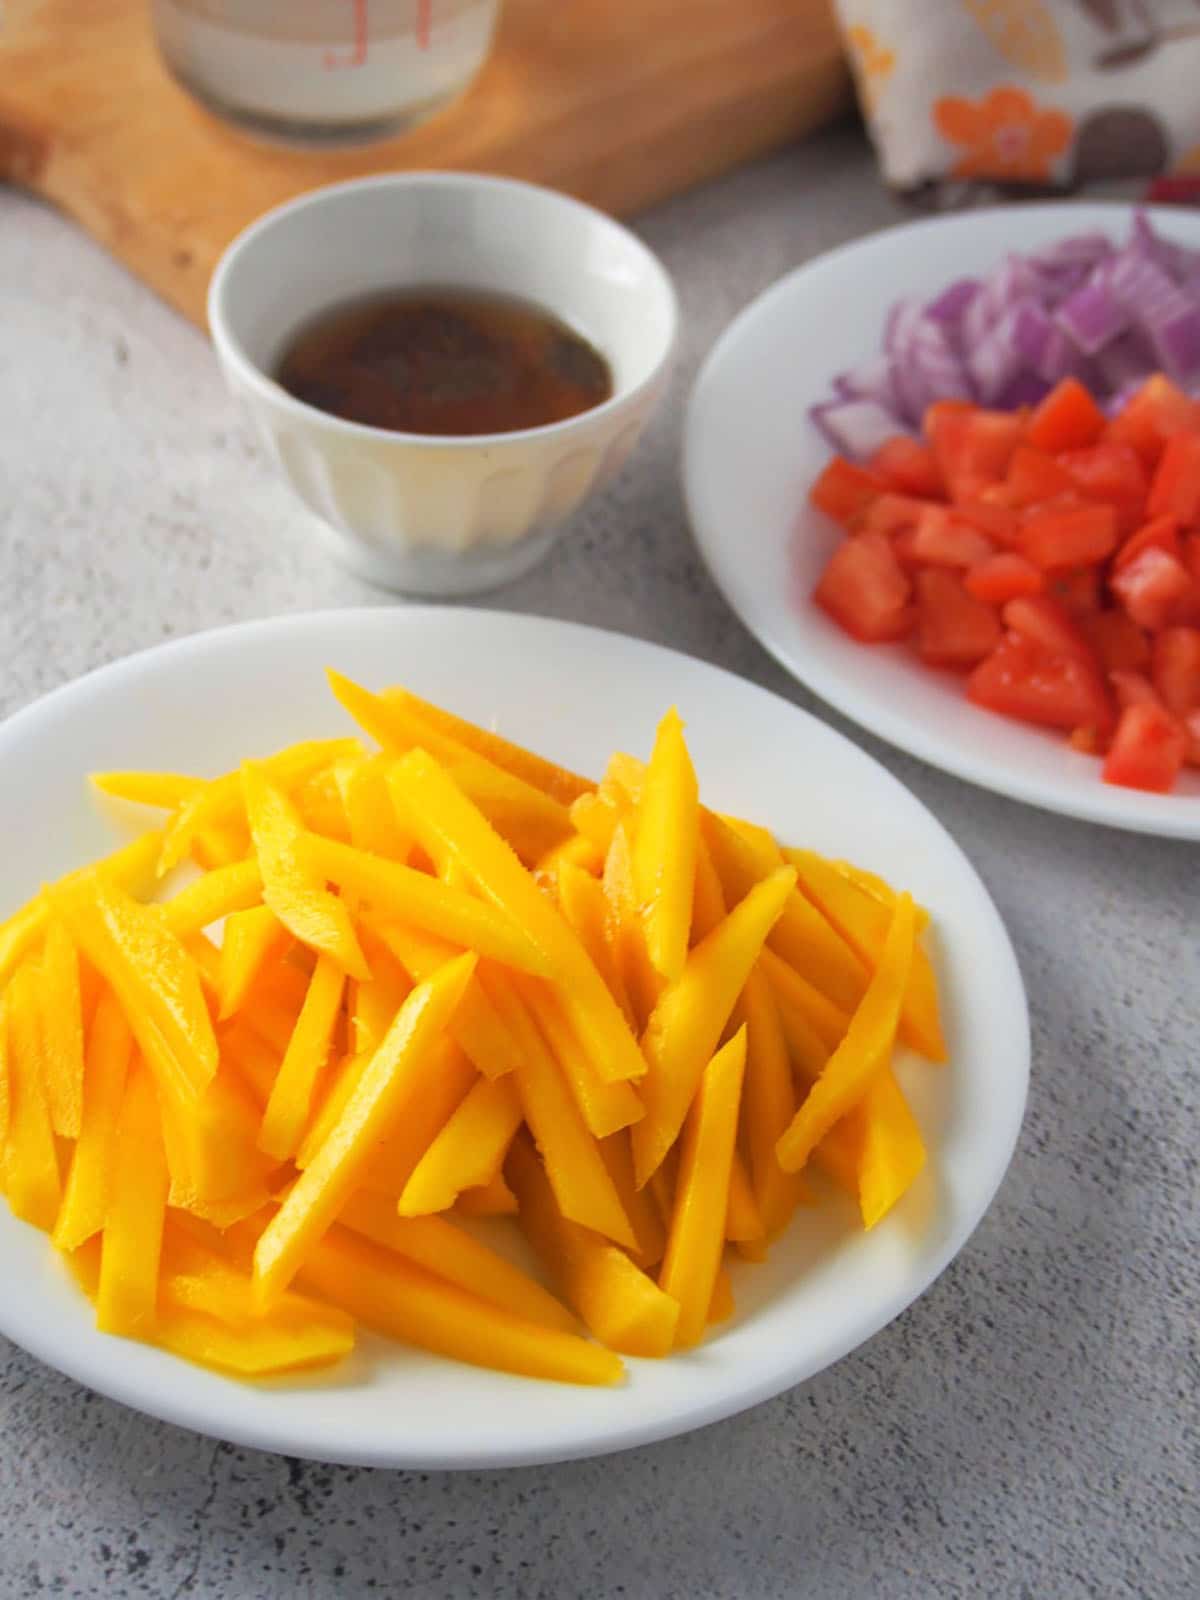 julienned mangoes, chopped tomatoes, chopped red onions, fish sauce, vinegar